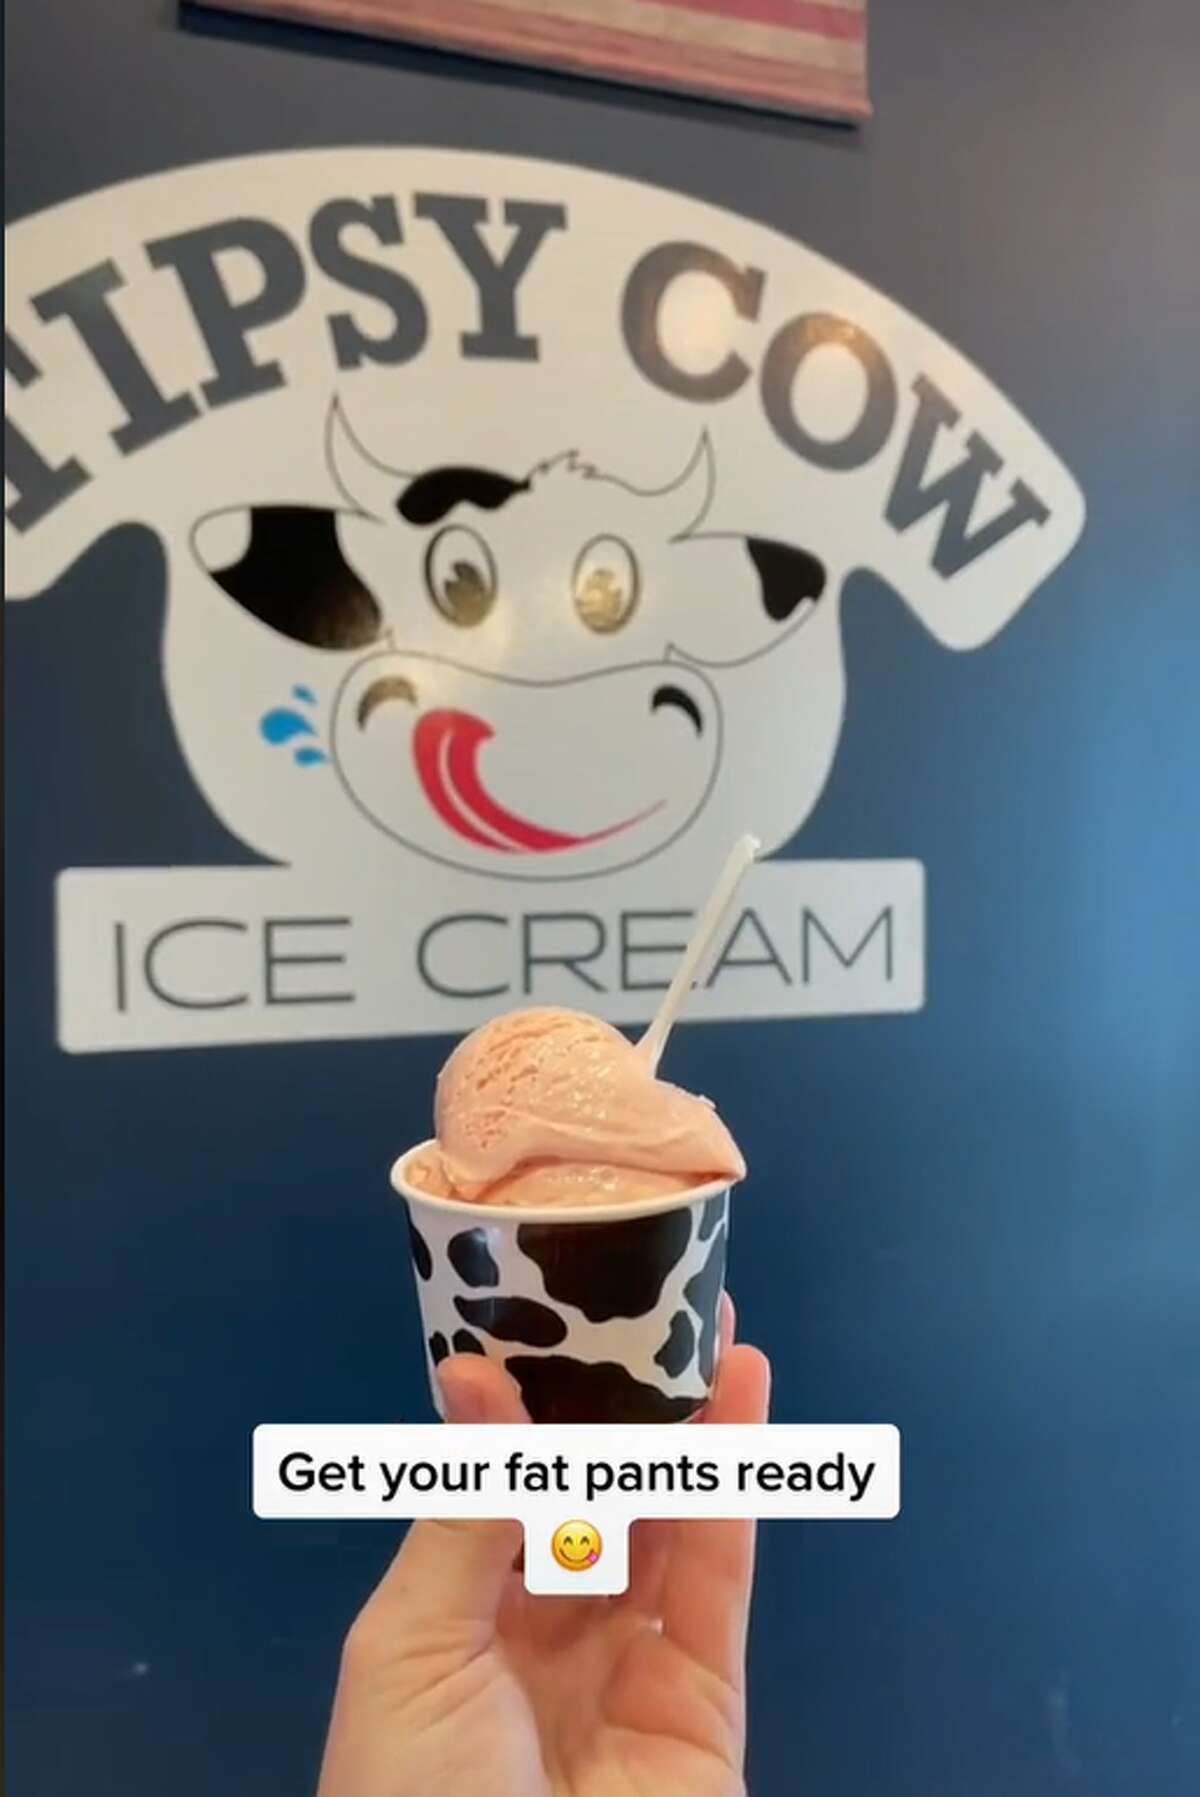 Customers from all over Texas visited Tipsy Cow Ice Cream in New Braunfels this weekend after a viral TikTok video.